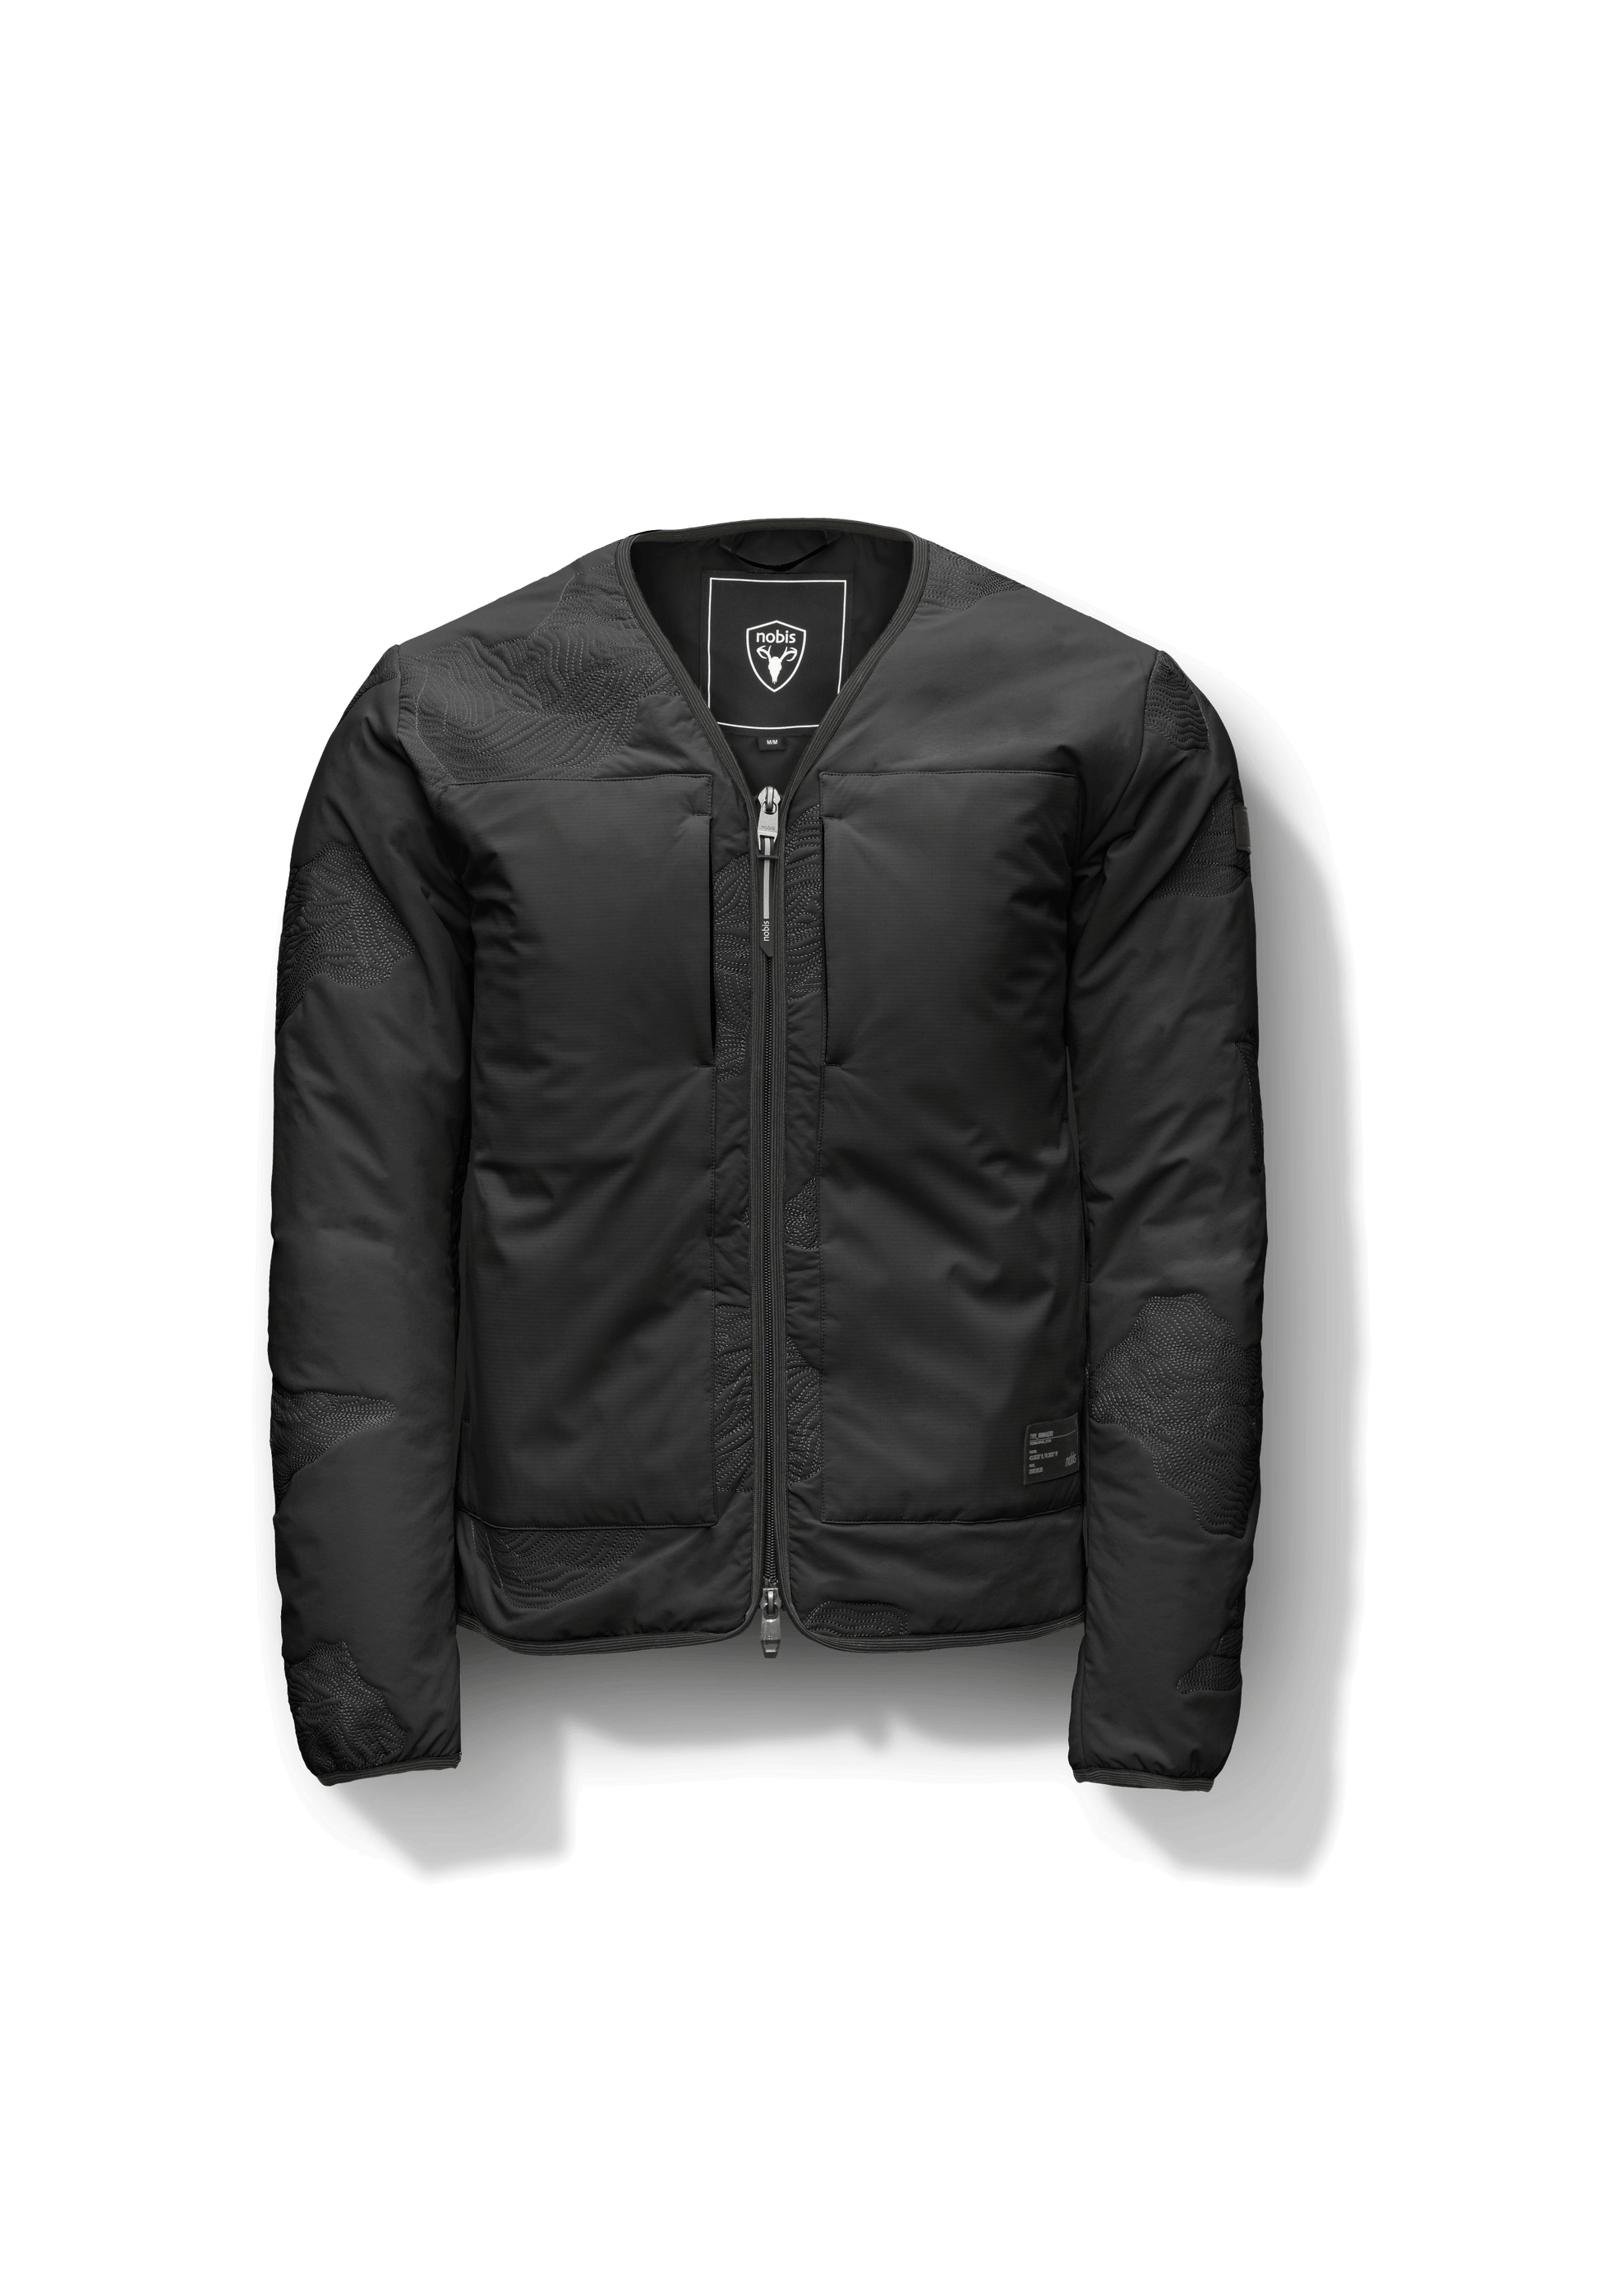 Gates Men's Performance Quilted V-Neck Jacket in hip length, centre front two-way zipper, hidden zipper chest pockets, side entry waist pockets, in Black